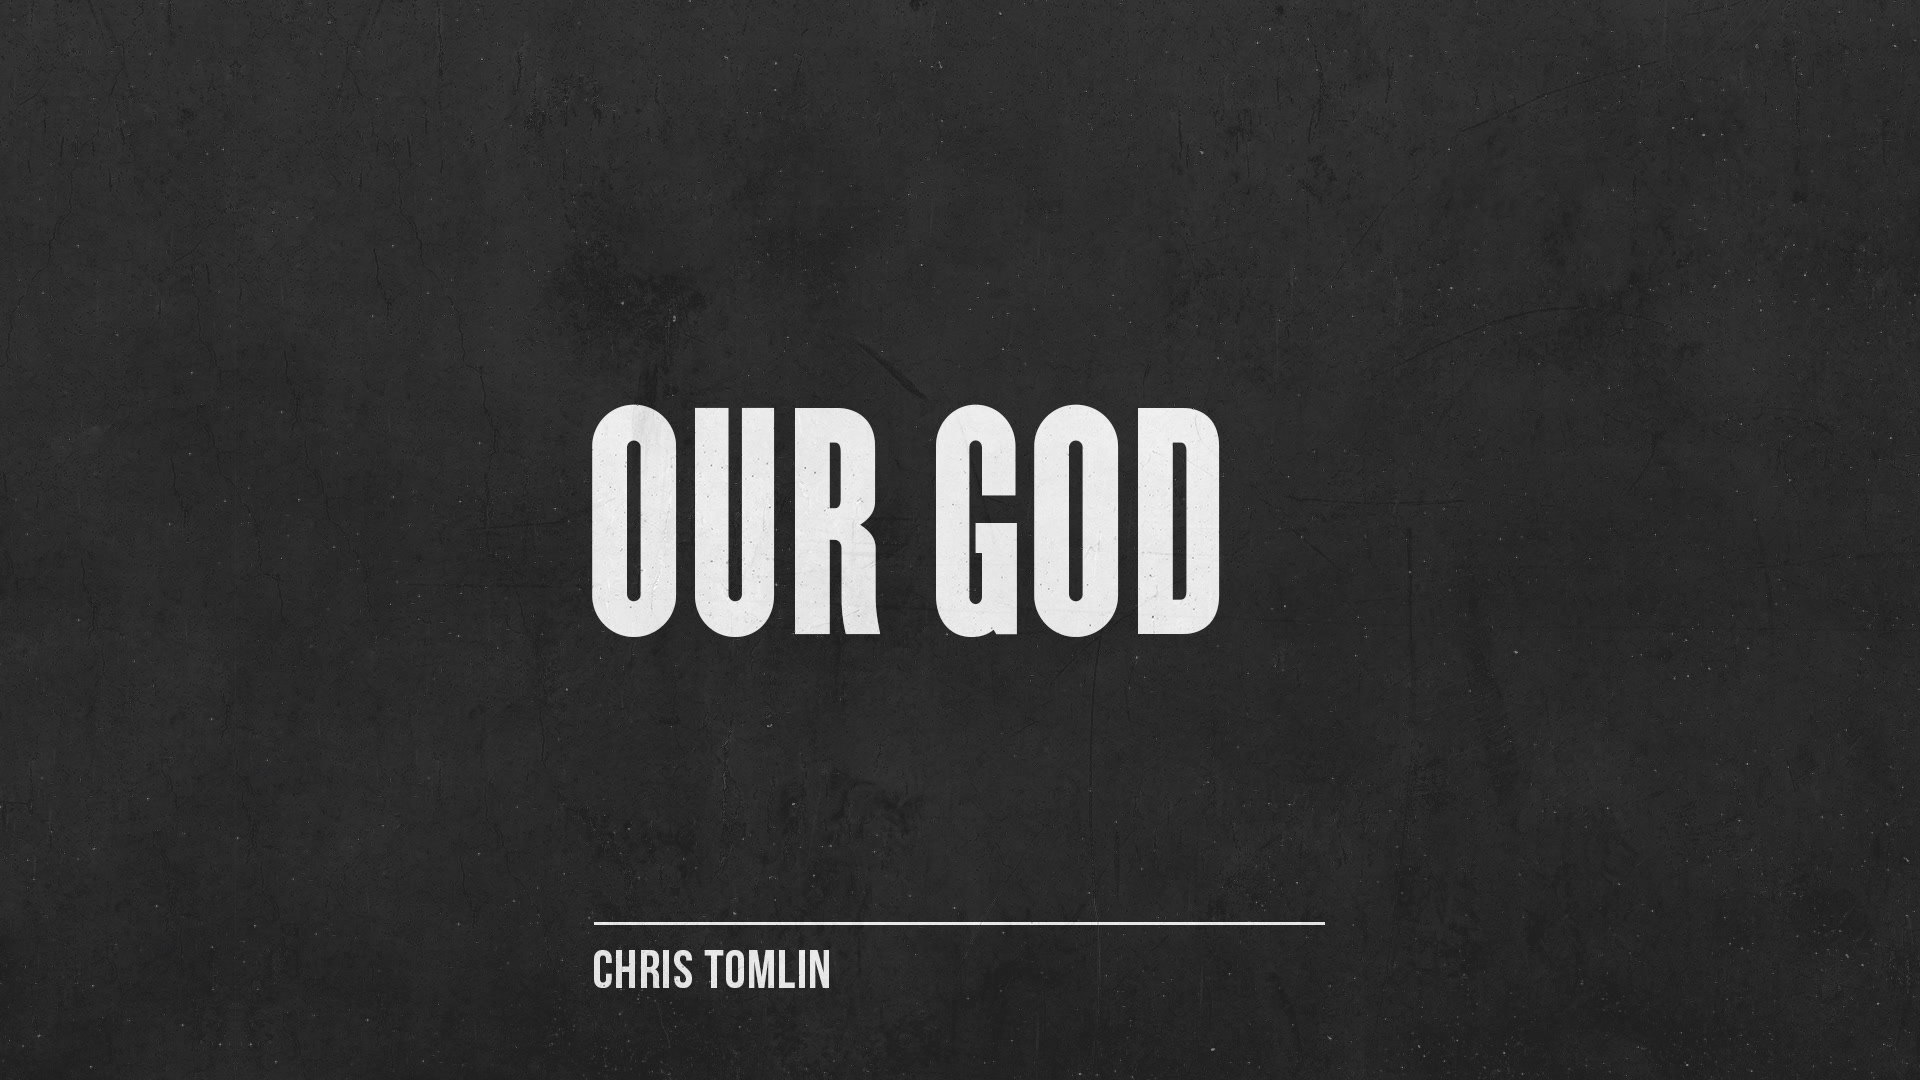 Chris Tomlin - Our God - video Dailymotion